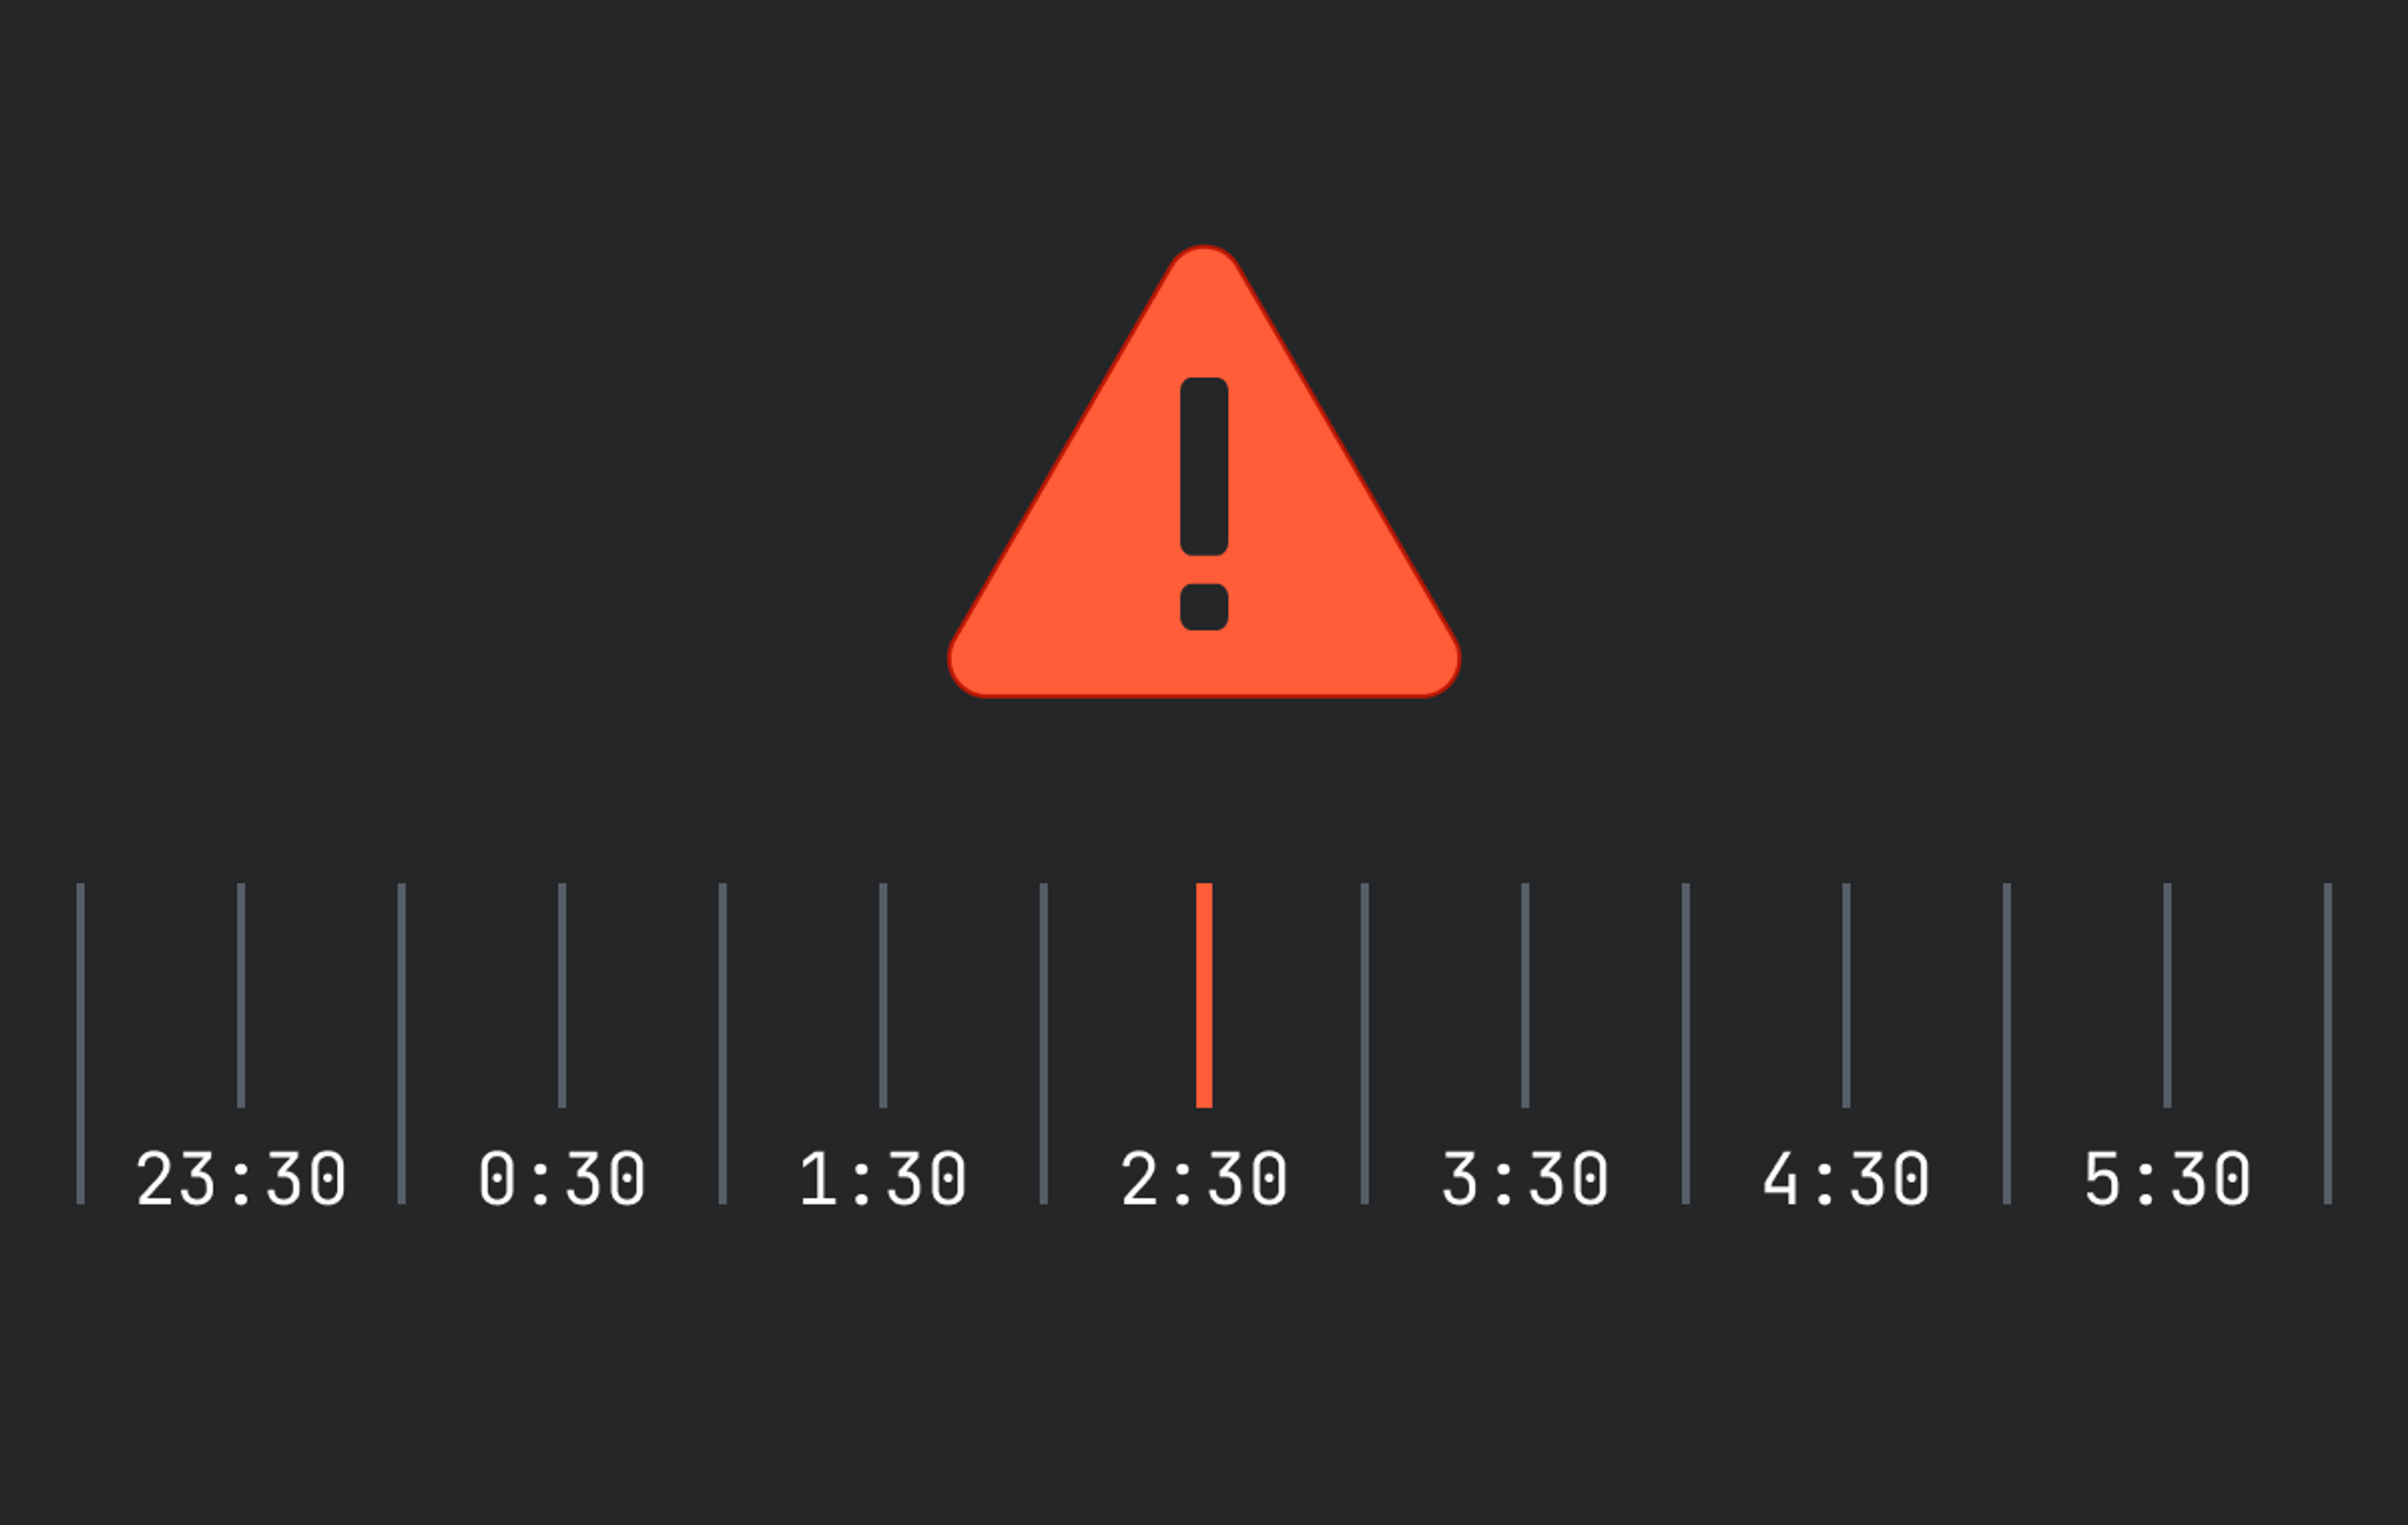 On a black screen is a timeline from 23:30-5:30. At the 2:30 mark there's a red line that leads to an alert -- a triangle with an exclamation point